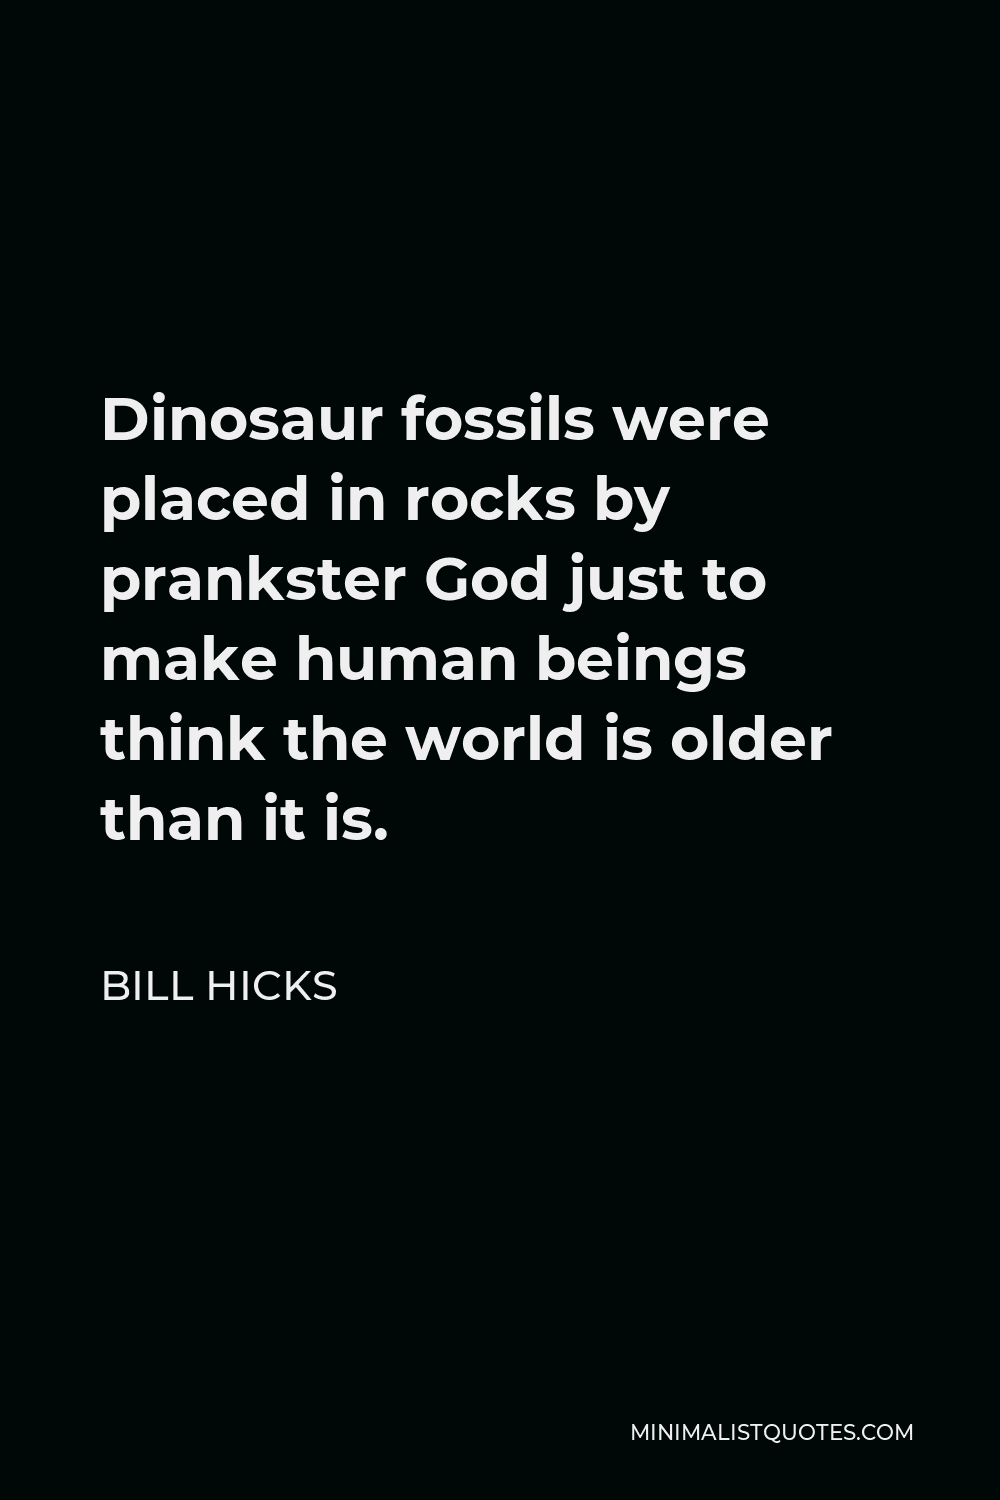 Bill Hicks Quote - Dinosaur fossils were placed in rocks by prankster God just to make human beings think the world is older than it is.